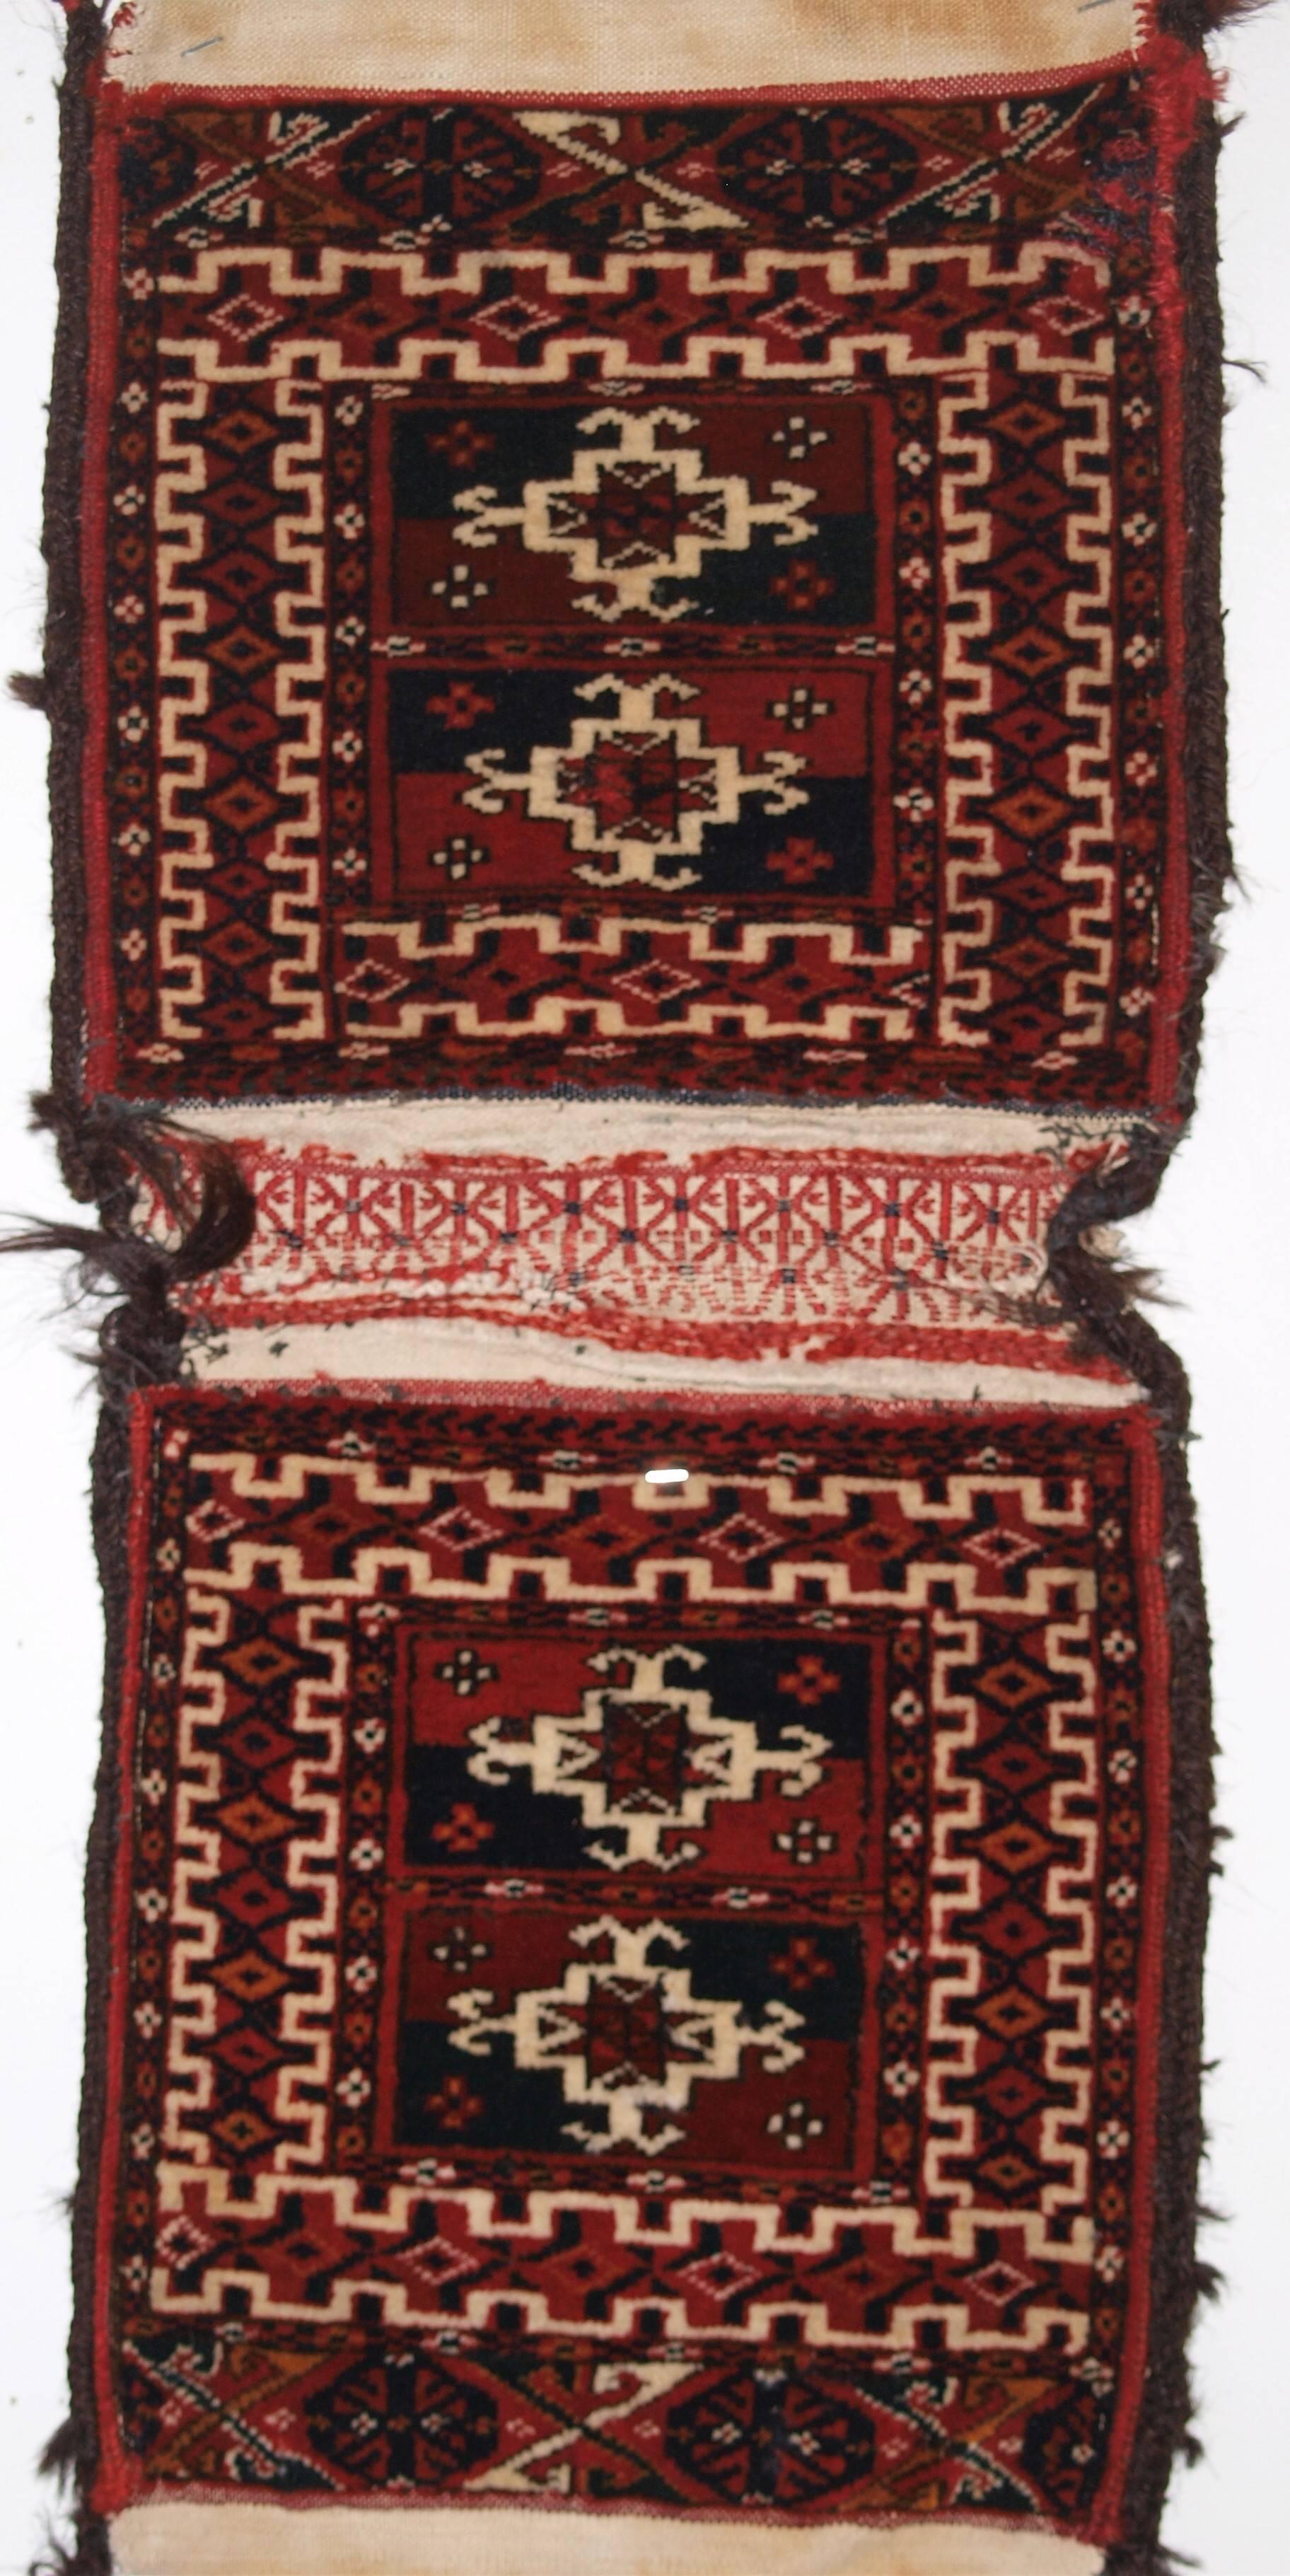 Antique complete pair of very small tekke Turkmen khorjin (saddle bags), outstanding condition, circa 1900.
Size: 1ft 11in x 11in. (58 x 27cm) 

Antique Tekke Turkmen khorjin (saddle bag) of very small size, Southern Turkmenistan,

circa